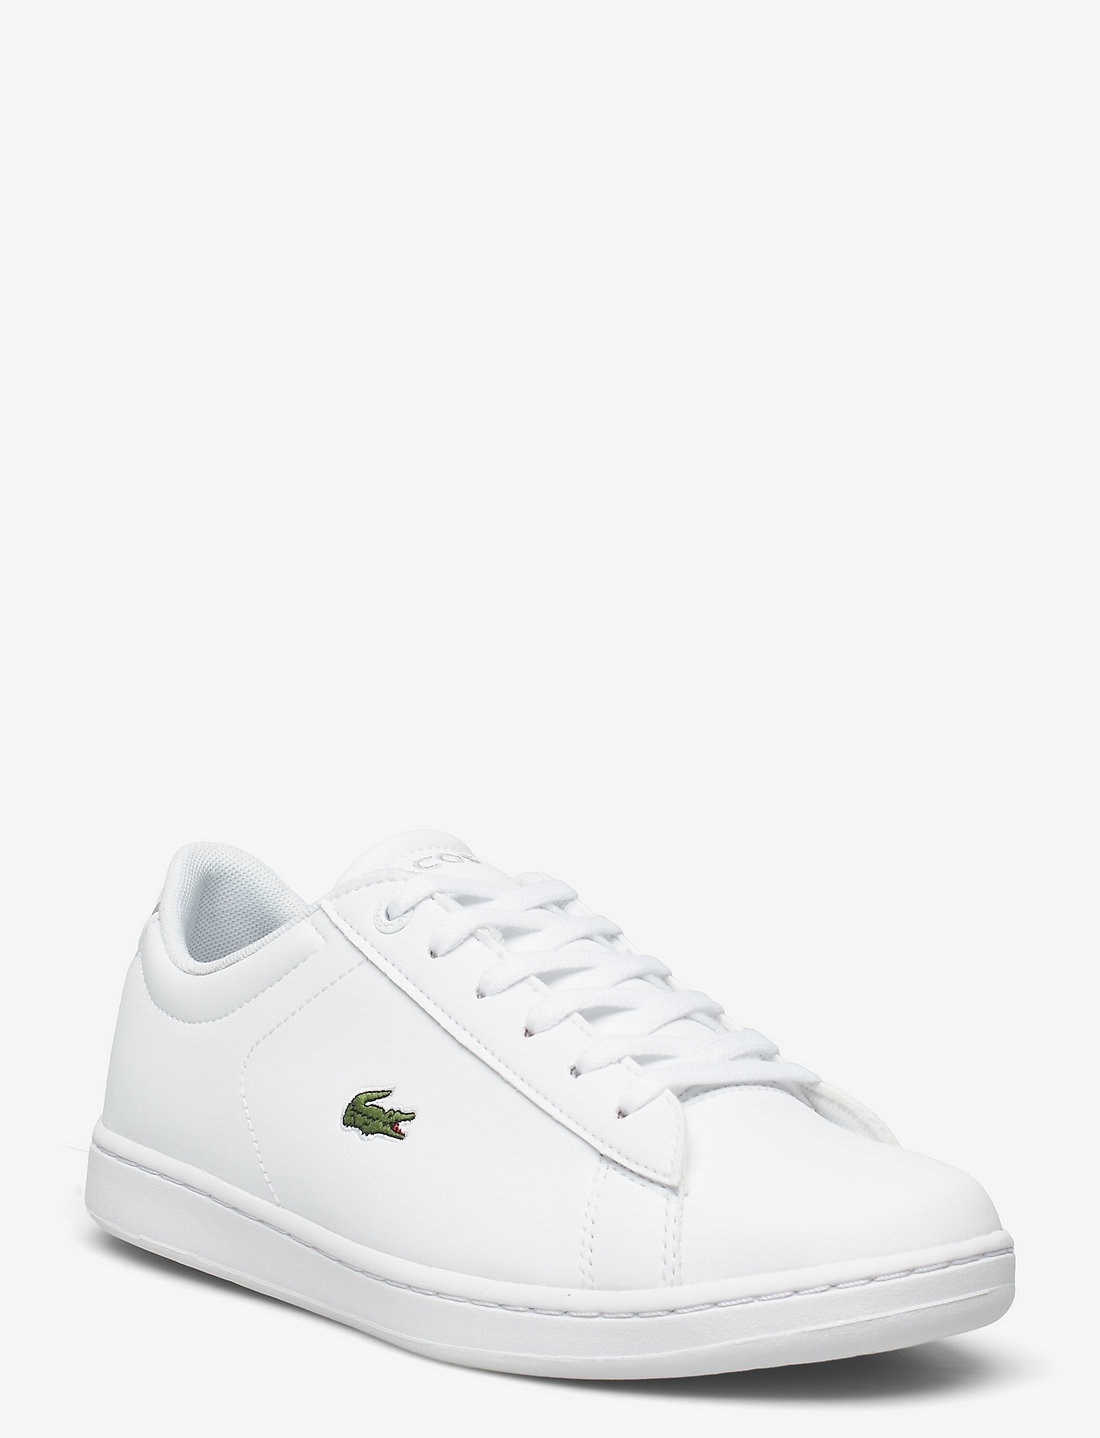 værdi flise Kloster Lacoste Shoes Carnaby Evo Bl 21 1 - Lave sneakers - Boozt.com